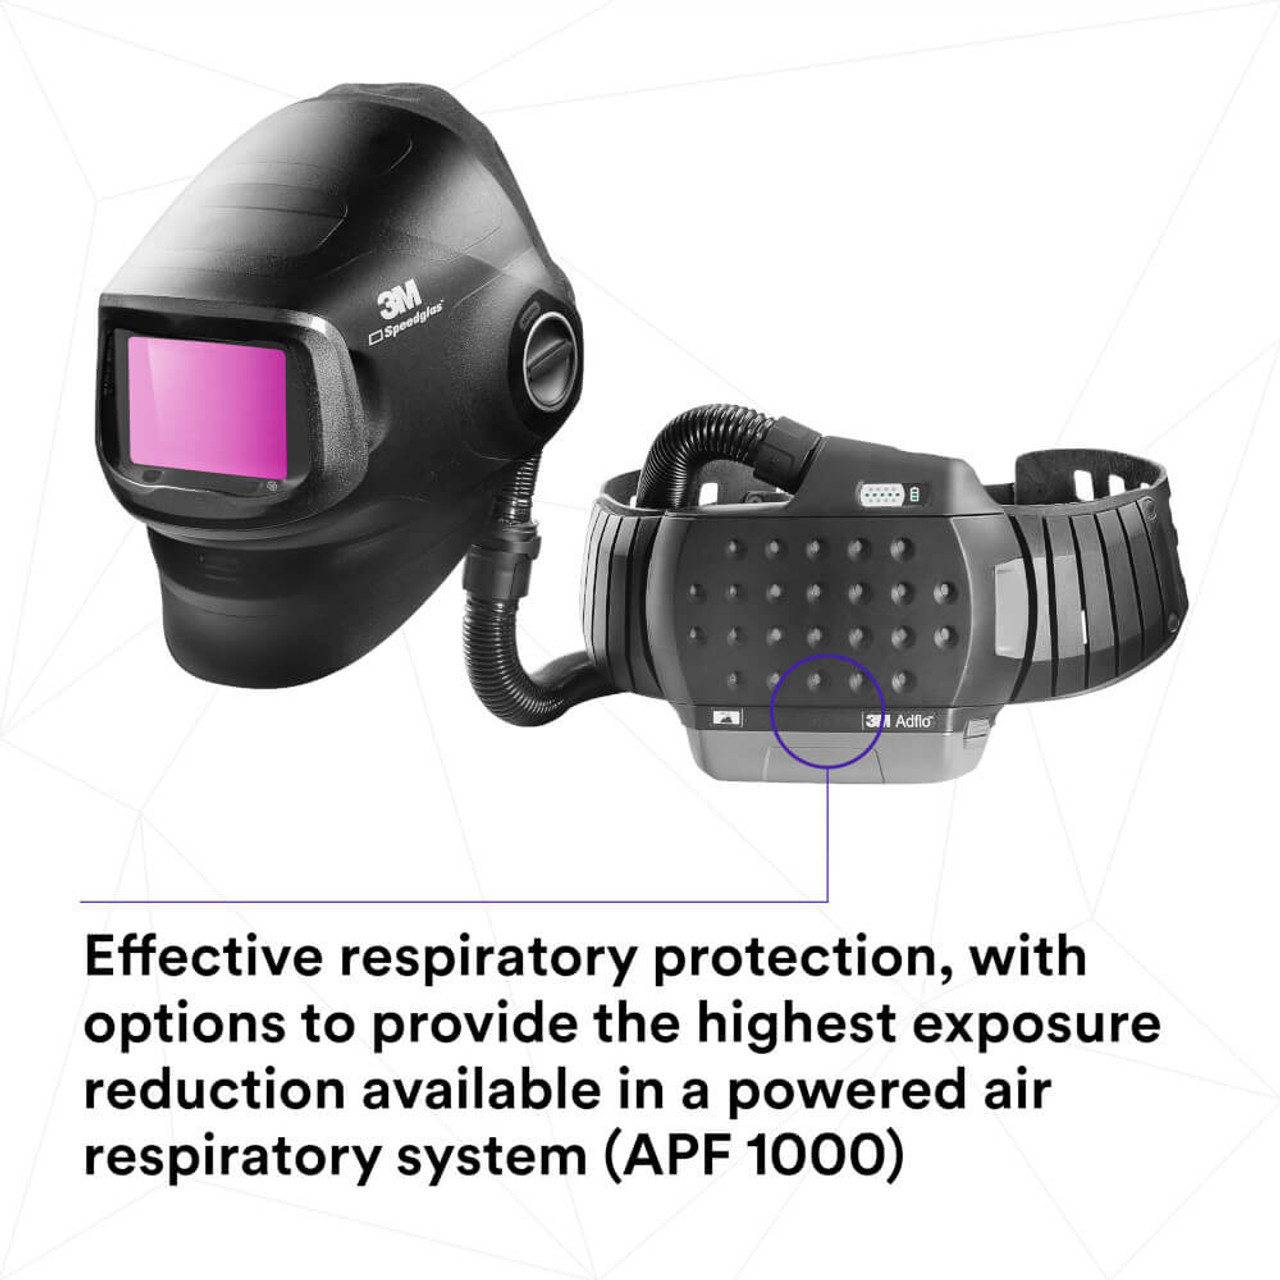 3M Speedglas G5-01VC with Adflo features, powered air kit model 617839, detailing the advanced filtration system in welding respiratory PPE equipment for enhanced breathability and protection.